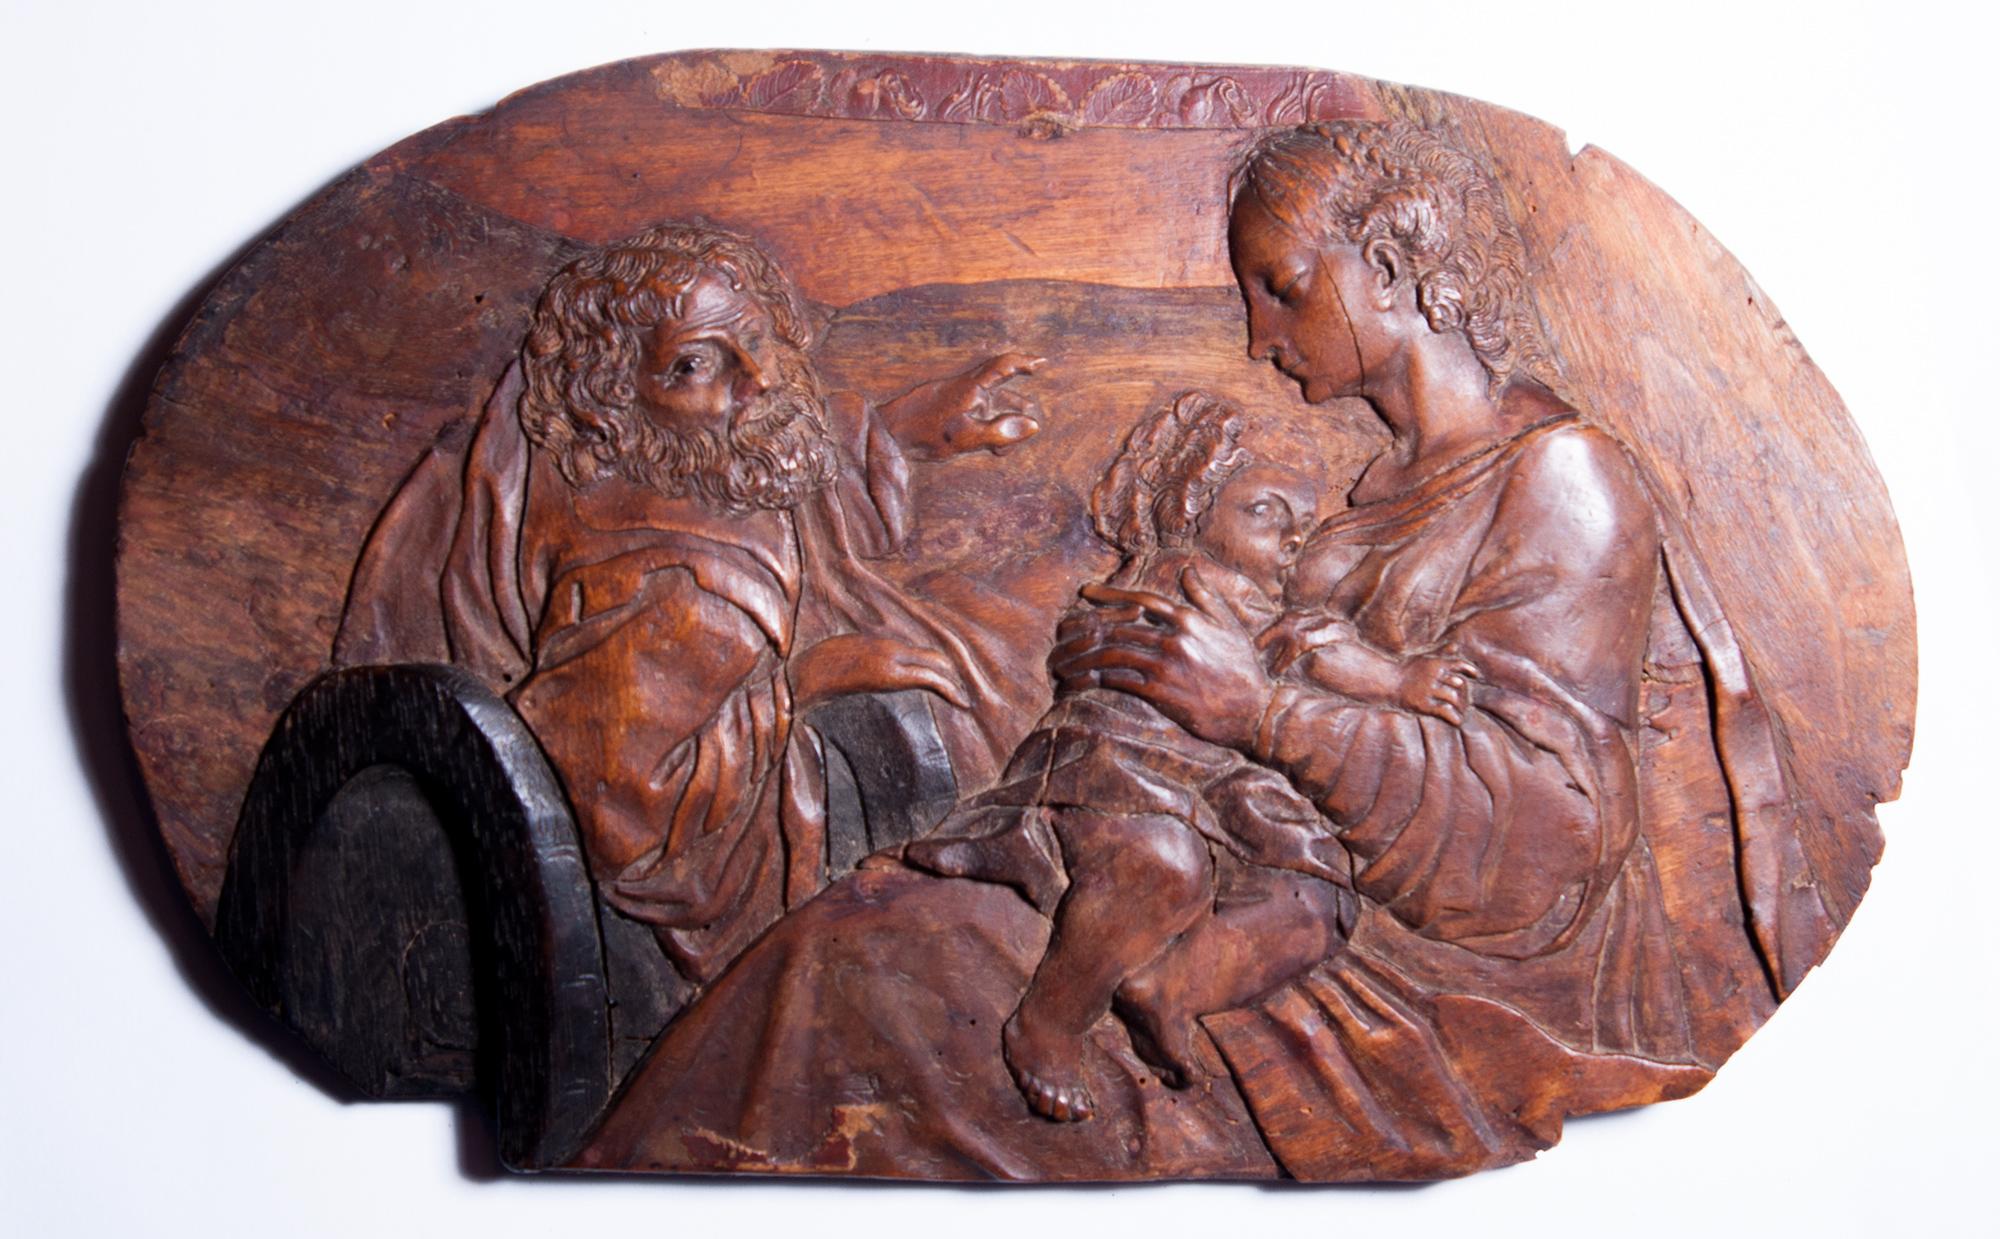 Unknown Figurative Sculpture - Holy Family, intarsia panel from Eger / Cheb, XVIII th c.